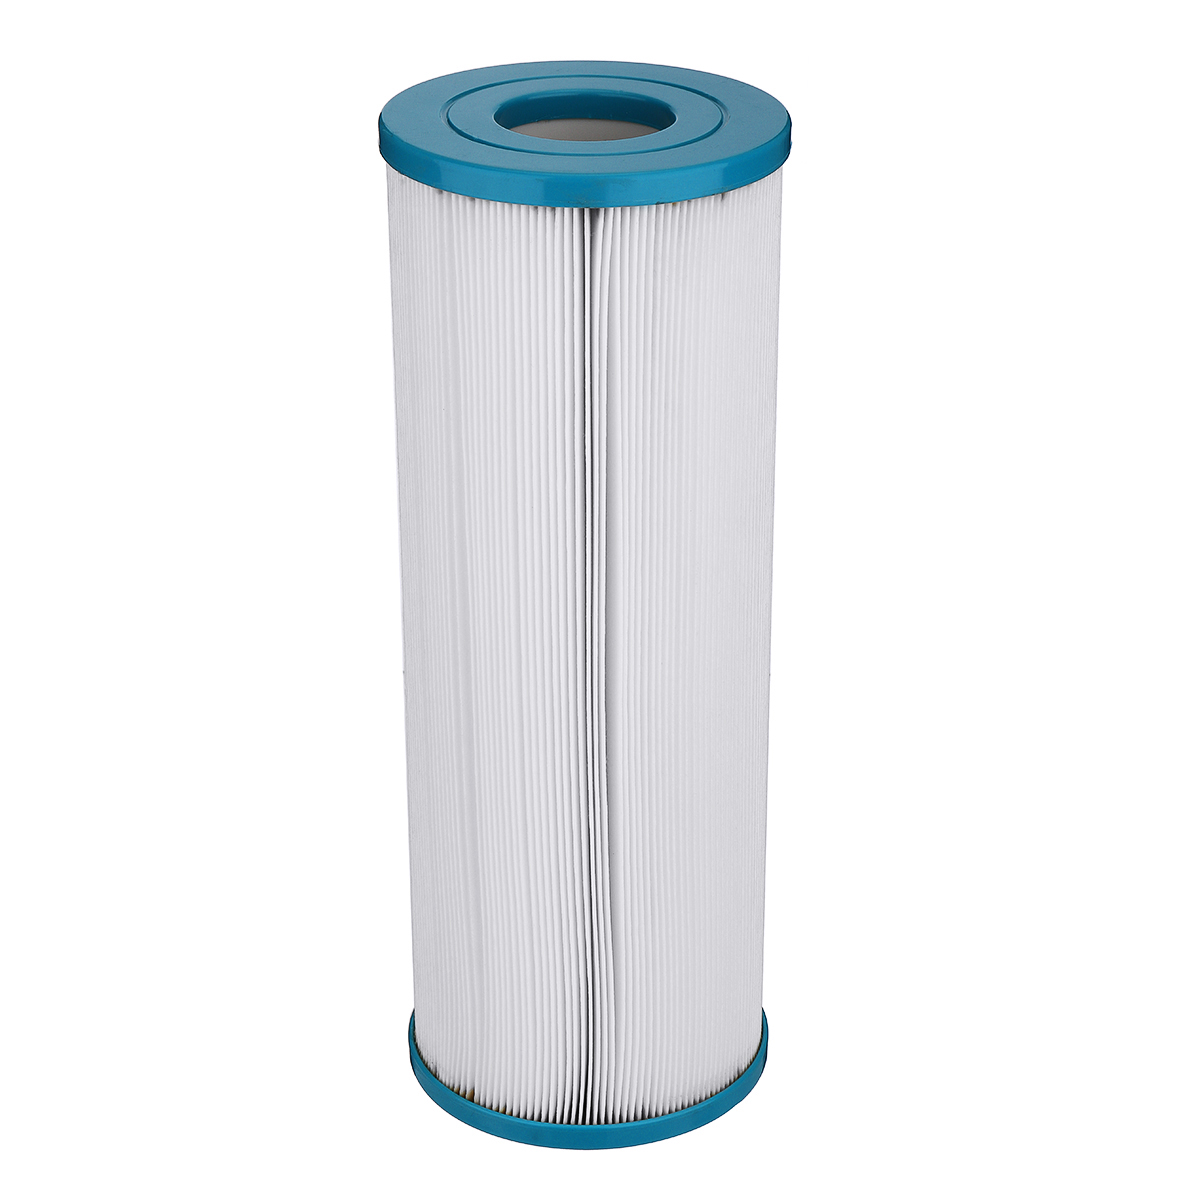 338x125x54mm-Pool-Filter-Cartridge-Replacement-Element-For-Rainbow-Dynamic-RDC-2-1382981-3